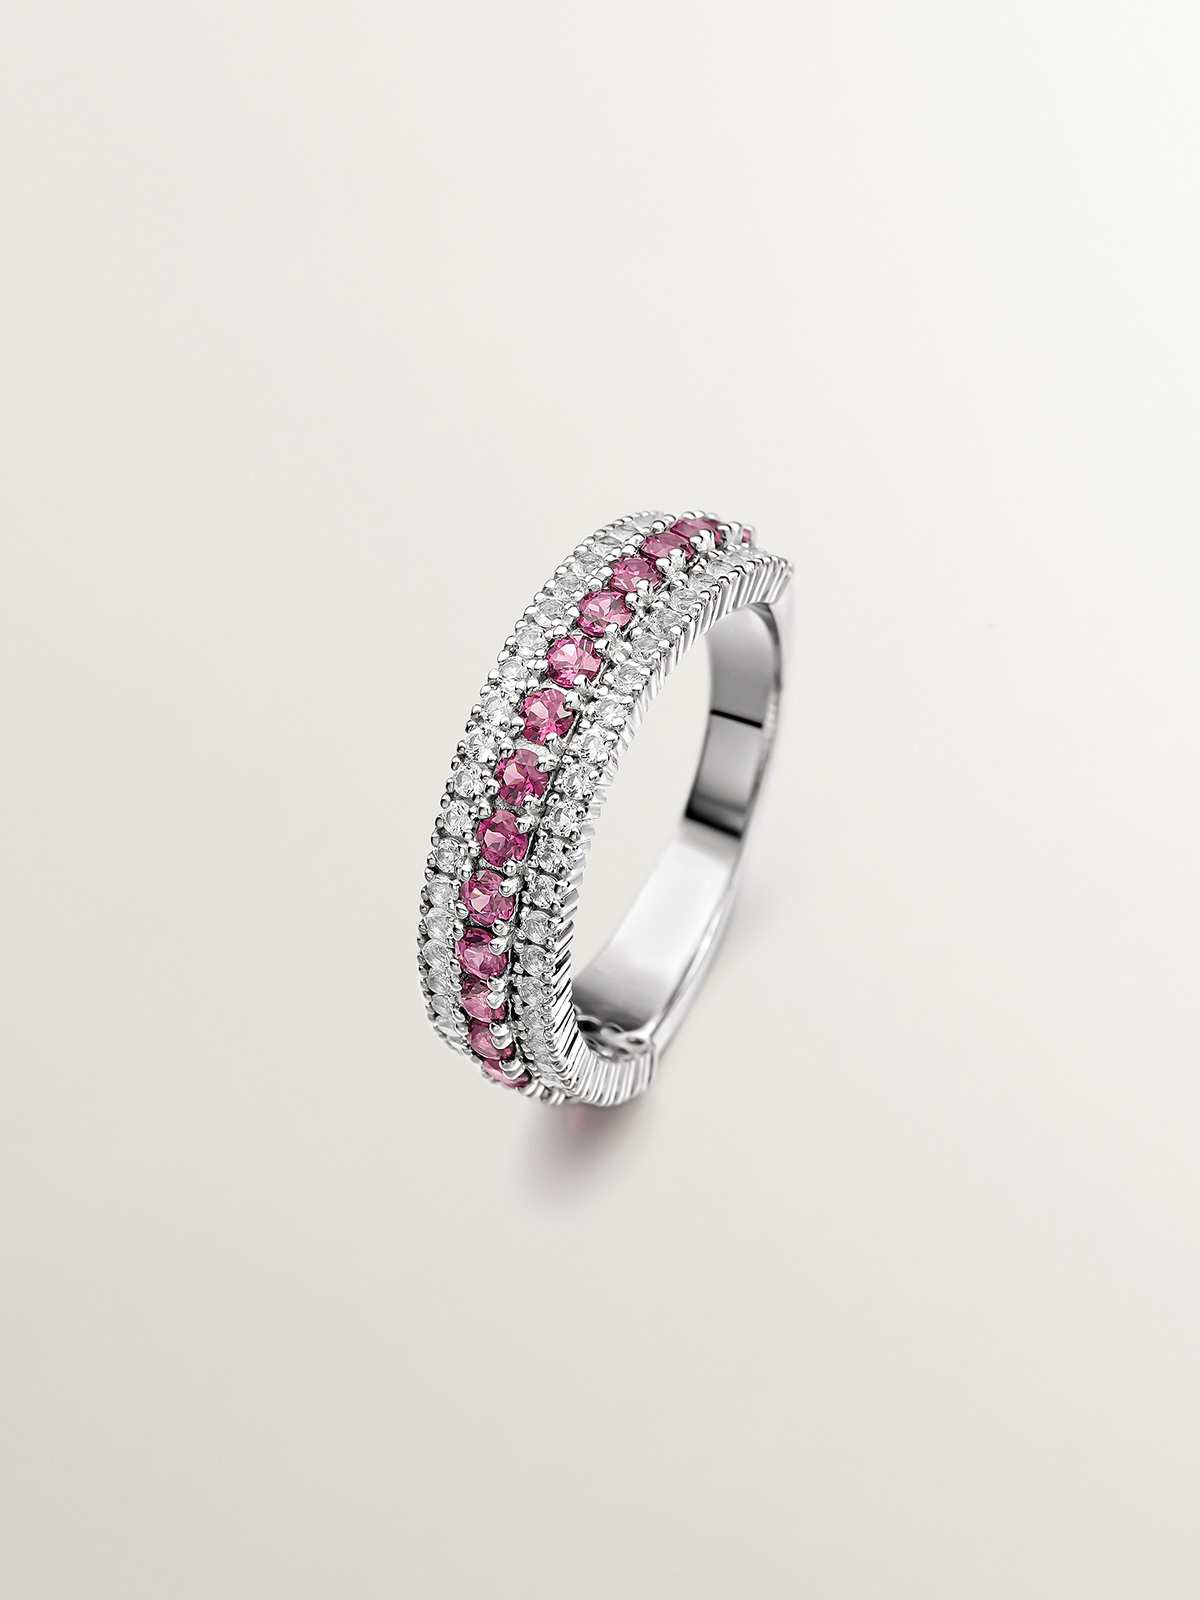 925 Silver ring with pink rhodolite and white topaz